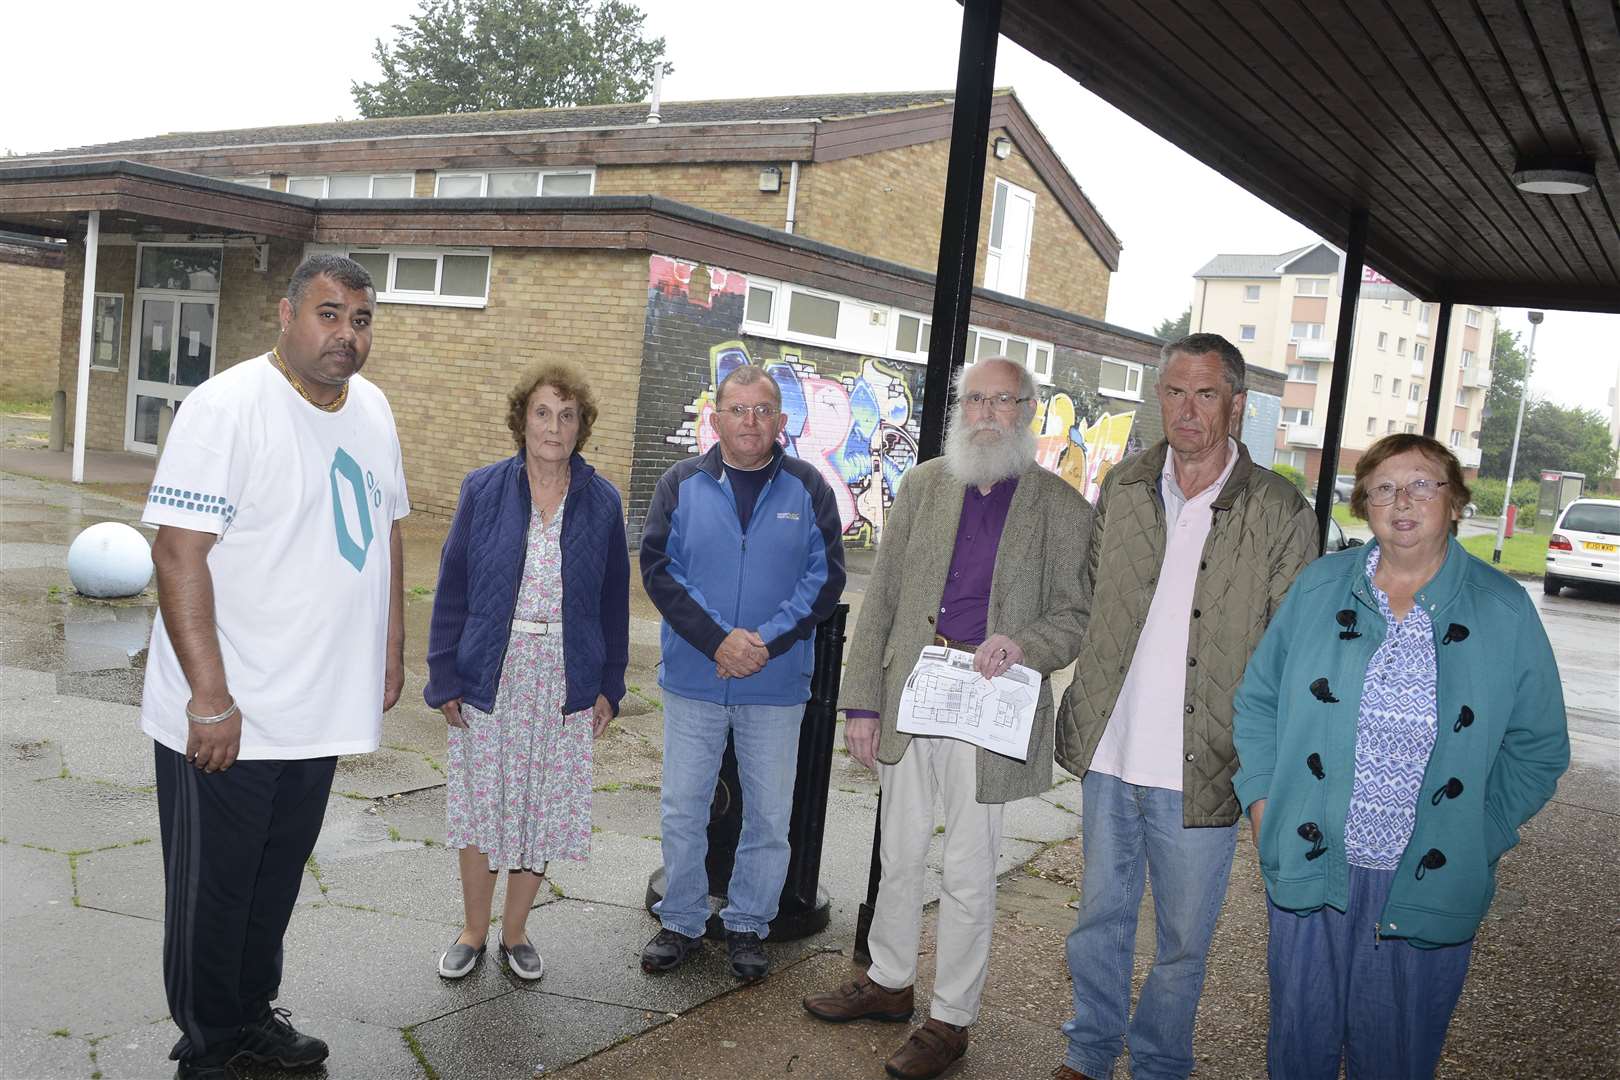 Ashford Bockhanger Community centre petition.Sunny who runs the Dhanda stores opposite the now closed community centre is rallying support for it to re open seen here with local residentsPicture: Paul Amos (2263390)